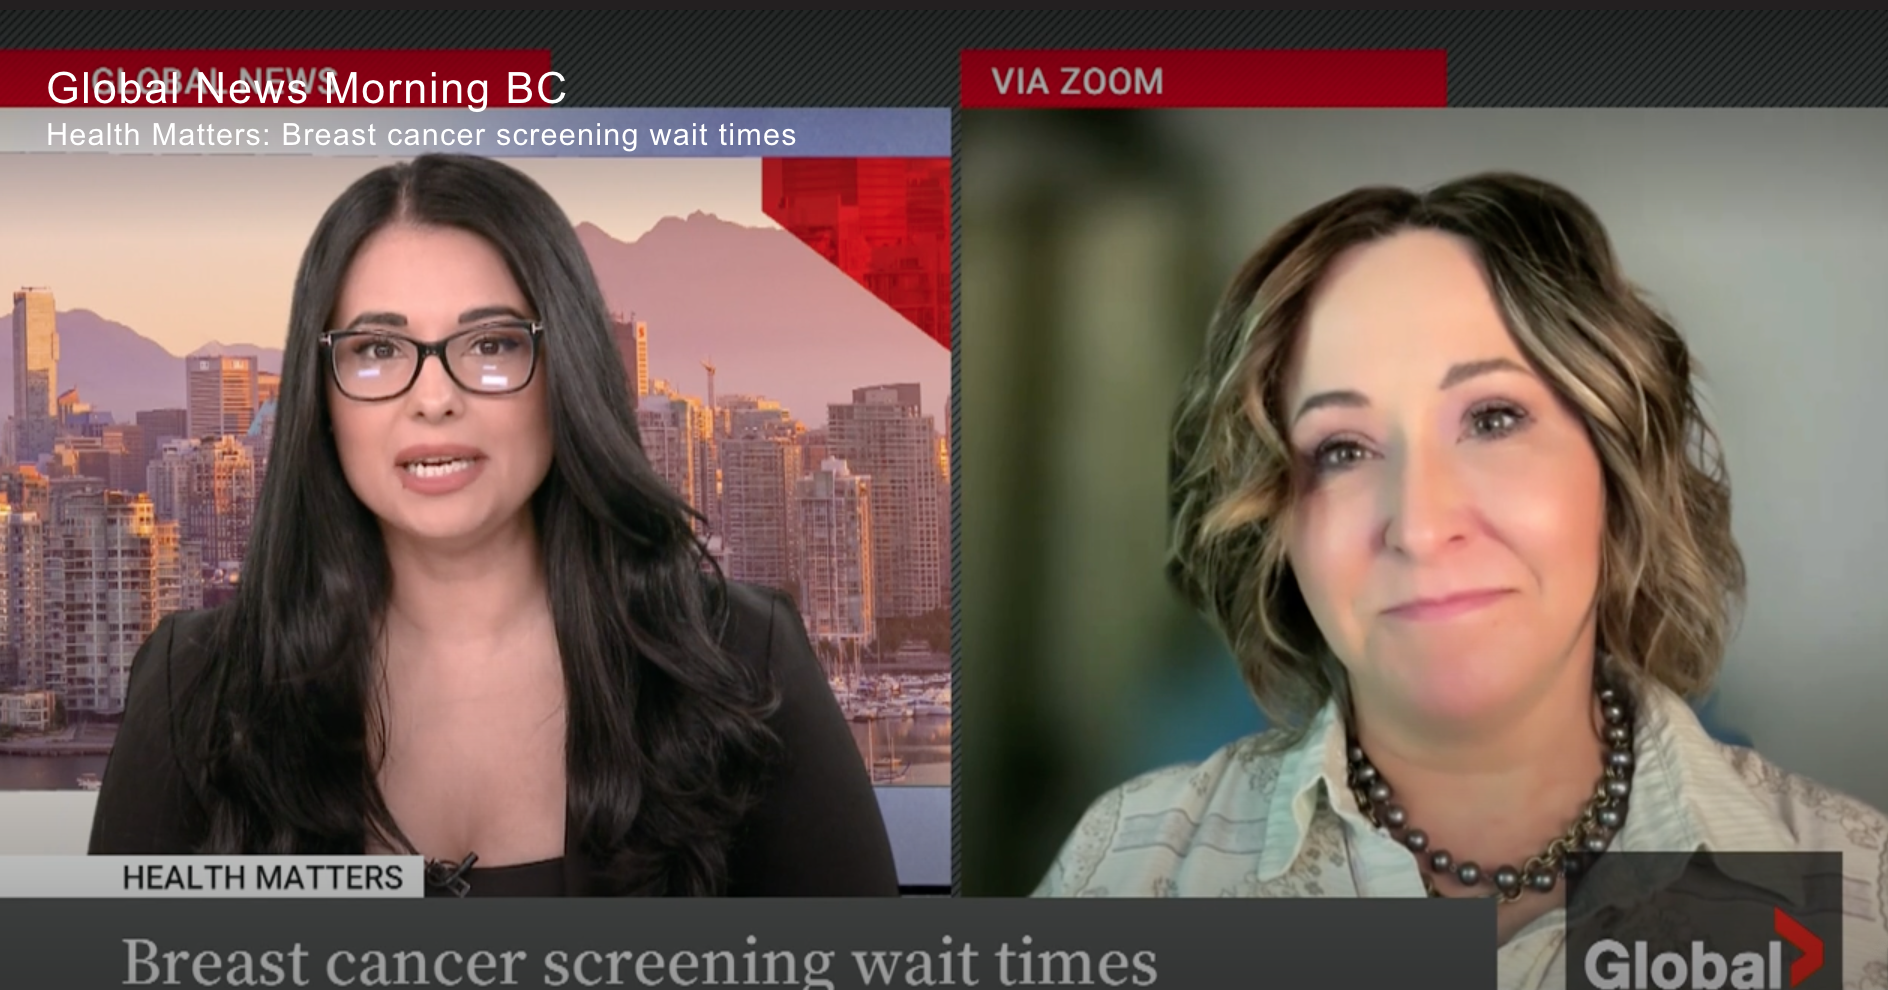 BC Radiological Society president Dr. Brenda Farnquist discusses her concerns about rising breast cancer screening wait times and how long waits impact patients.